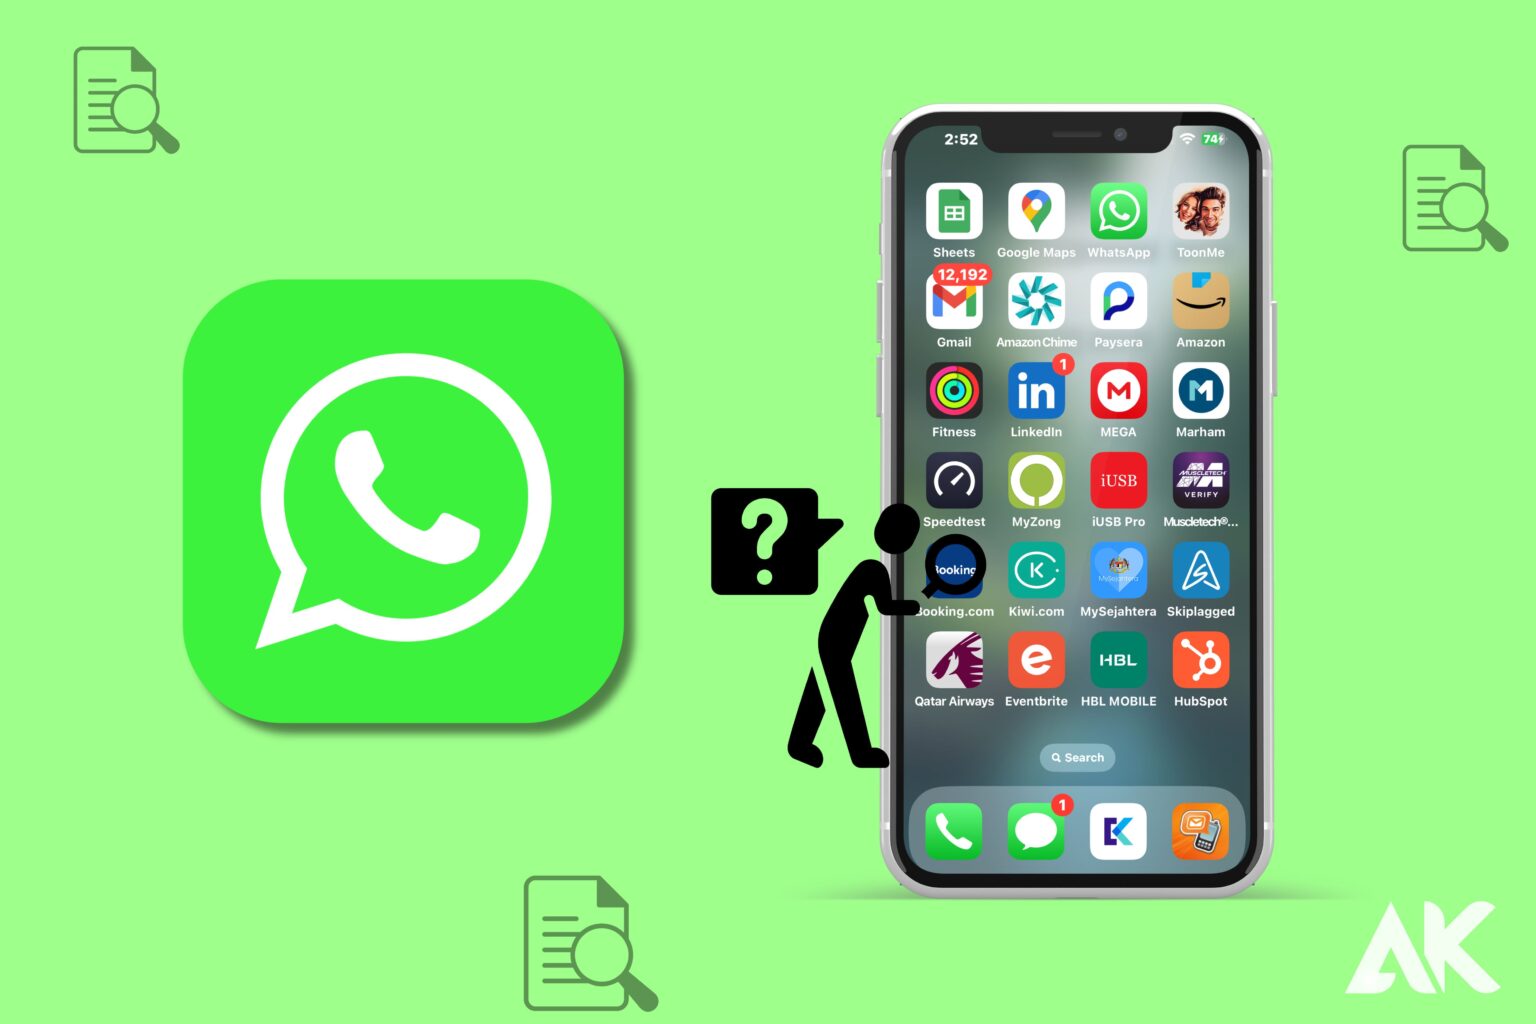 Where to Find Whatsapp Files on iPhone?